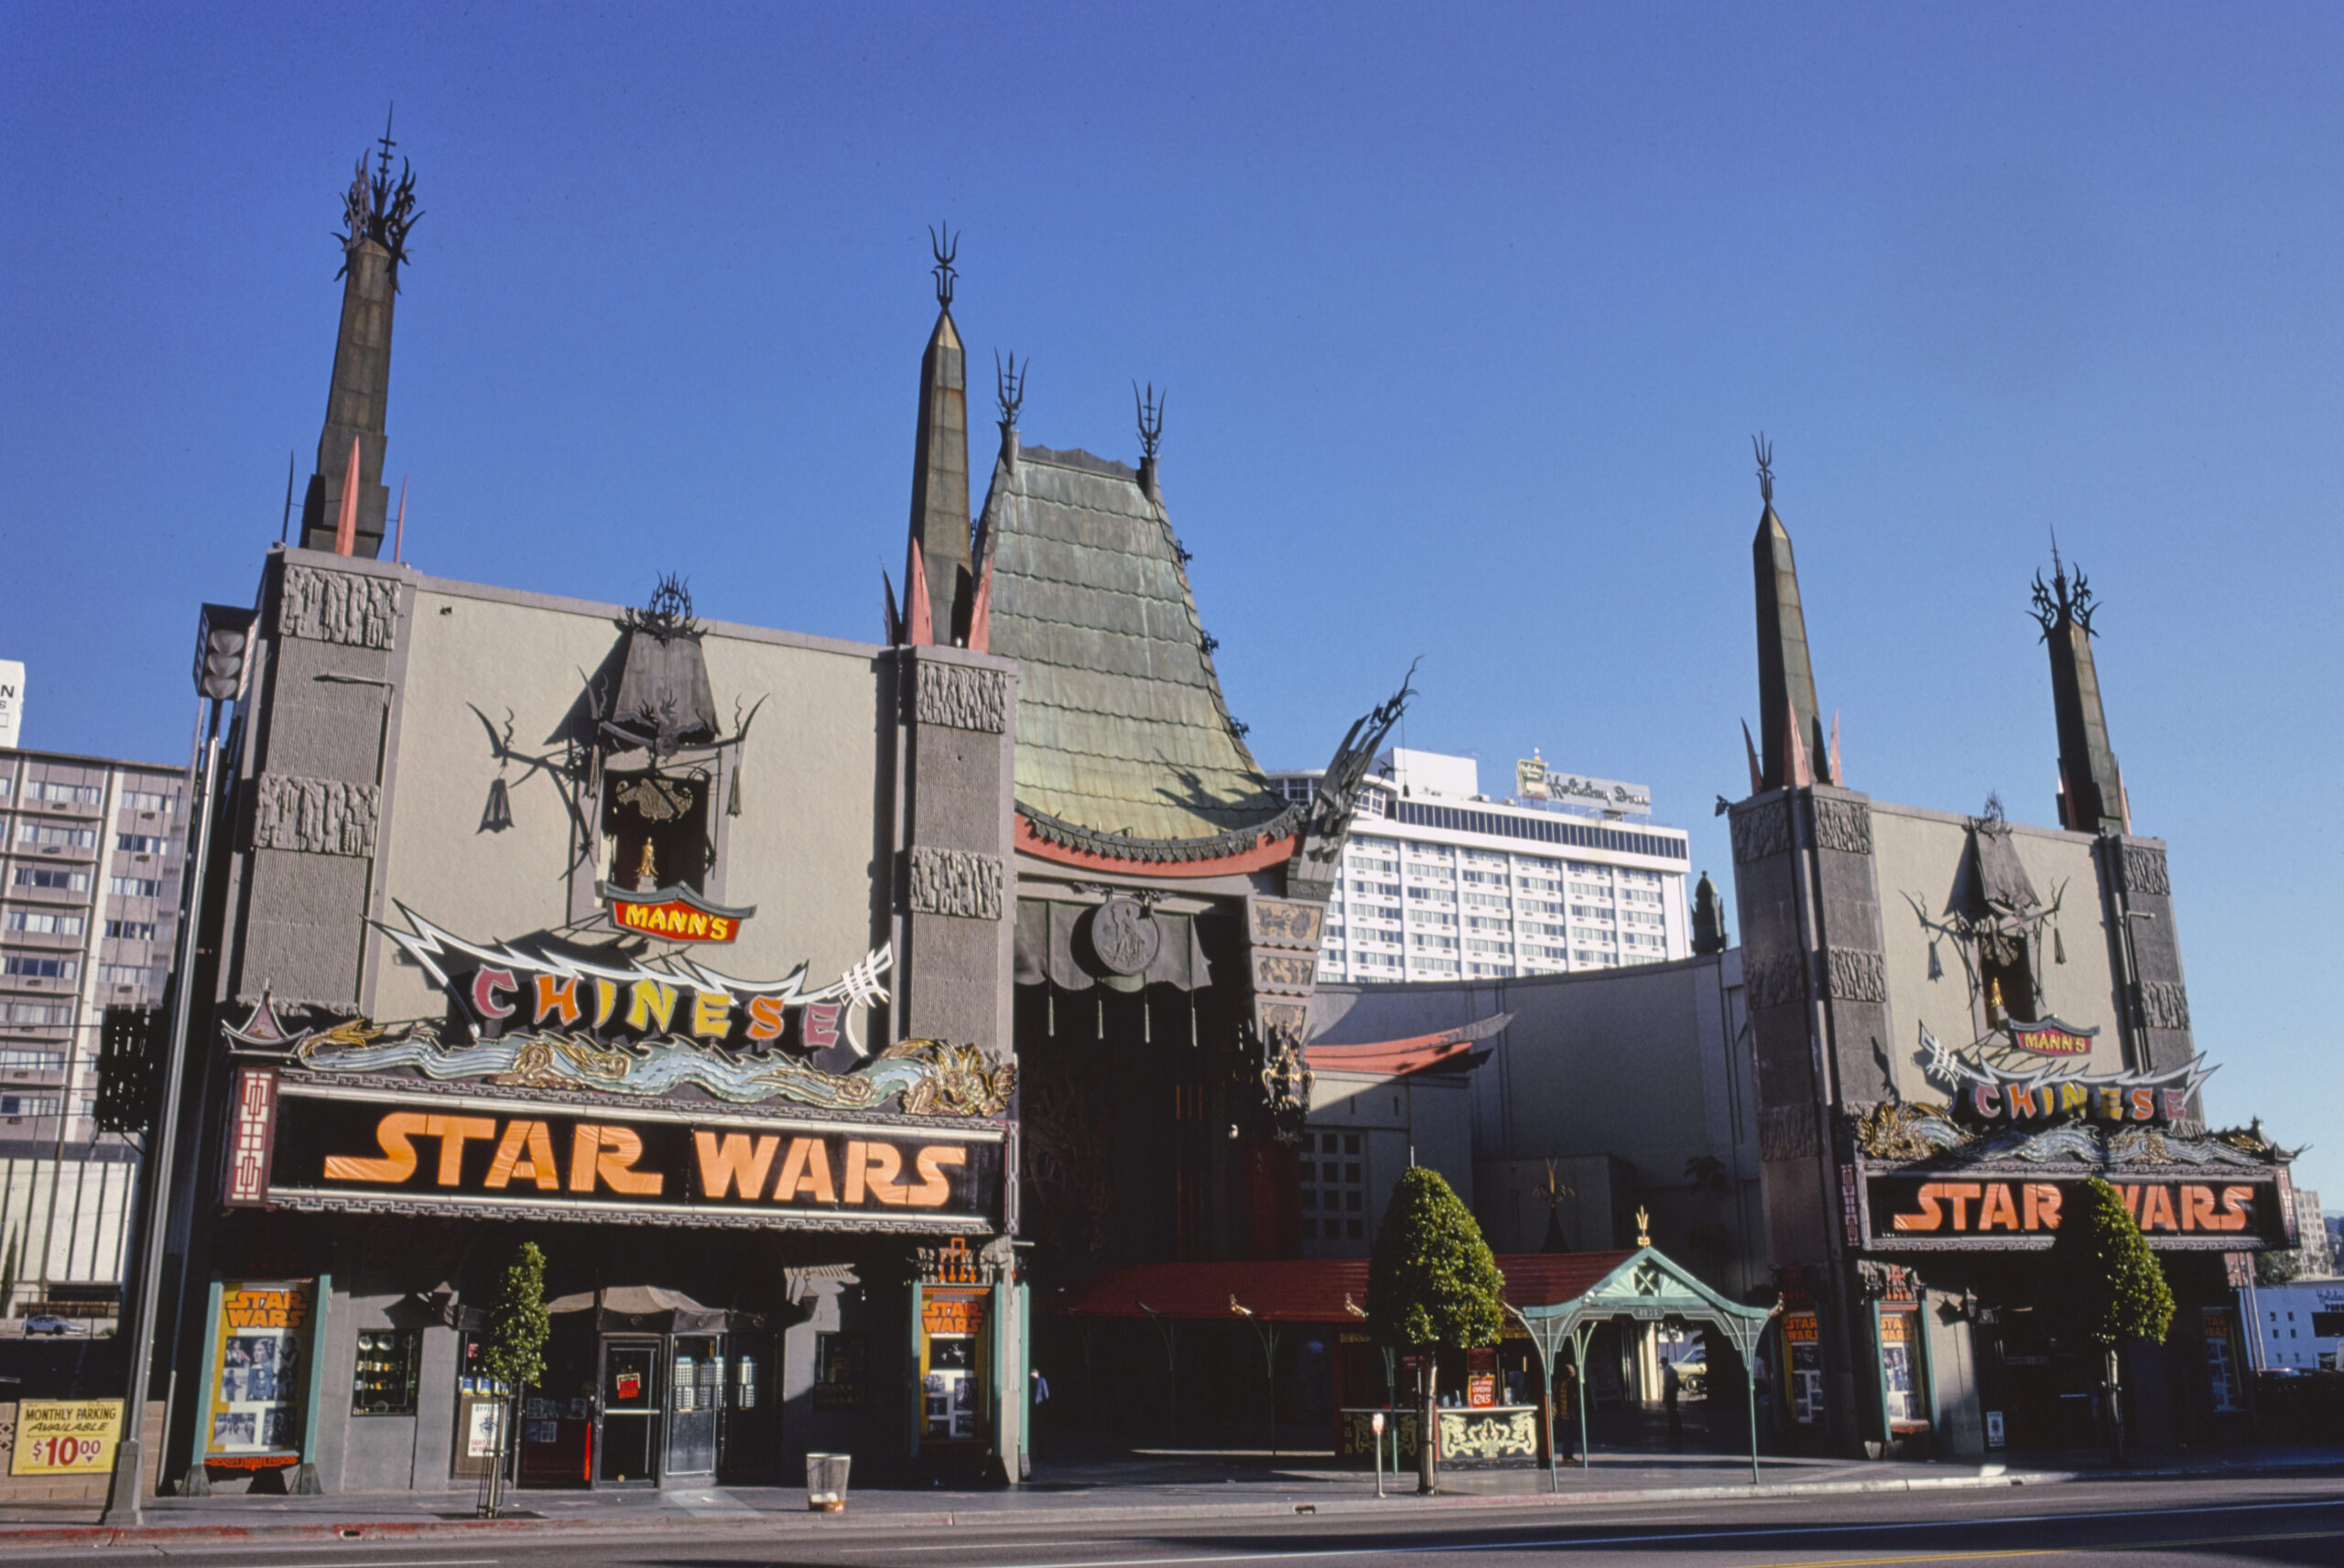 1970s America - Grauman's Chinese Theater, Hollywood, California 1977. (Photo Credit: HUM Images/Universal Images Group via Getty Images)